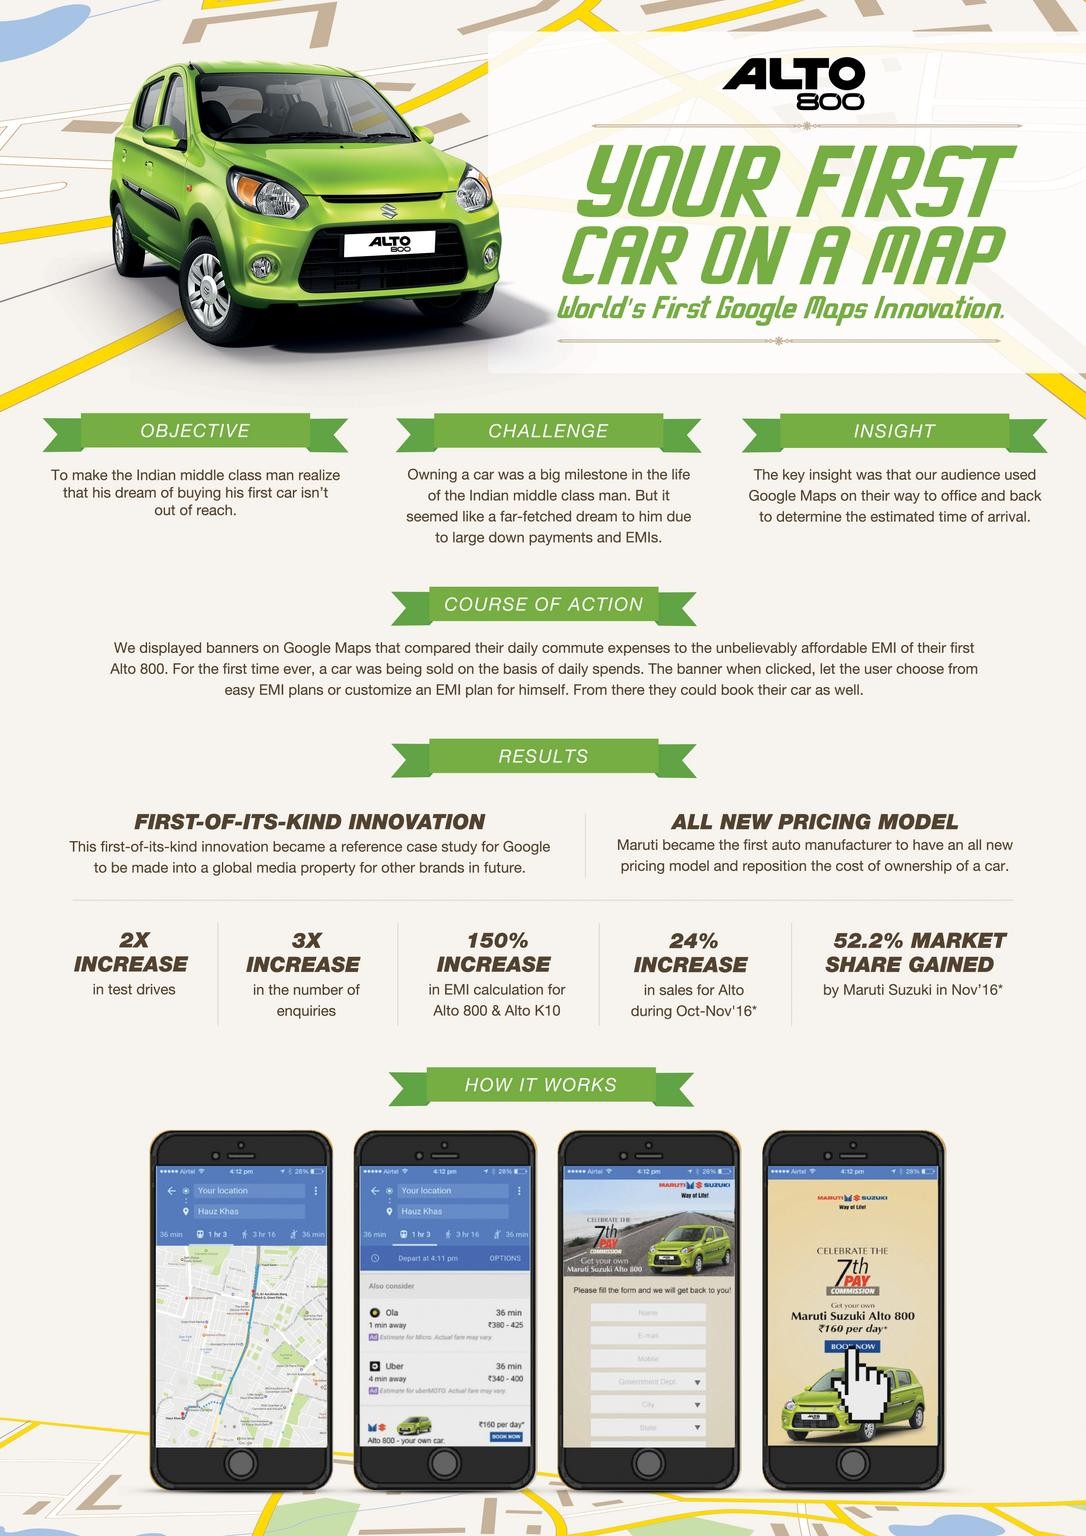 ALTO 800 - YOUR FIRST CAR ON THE MAP